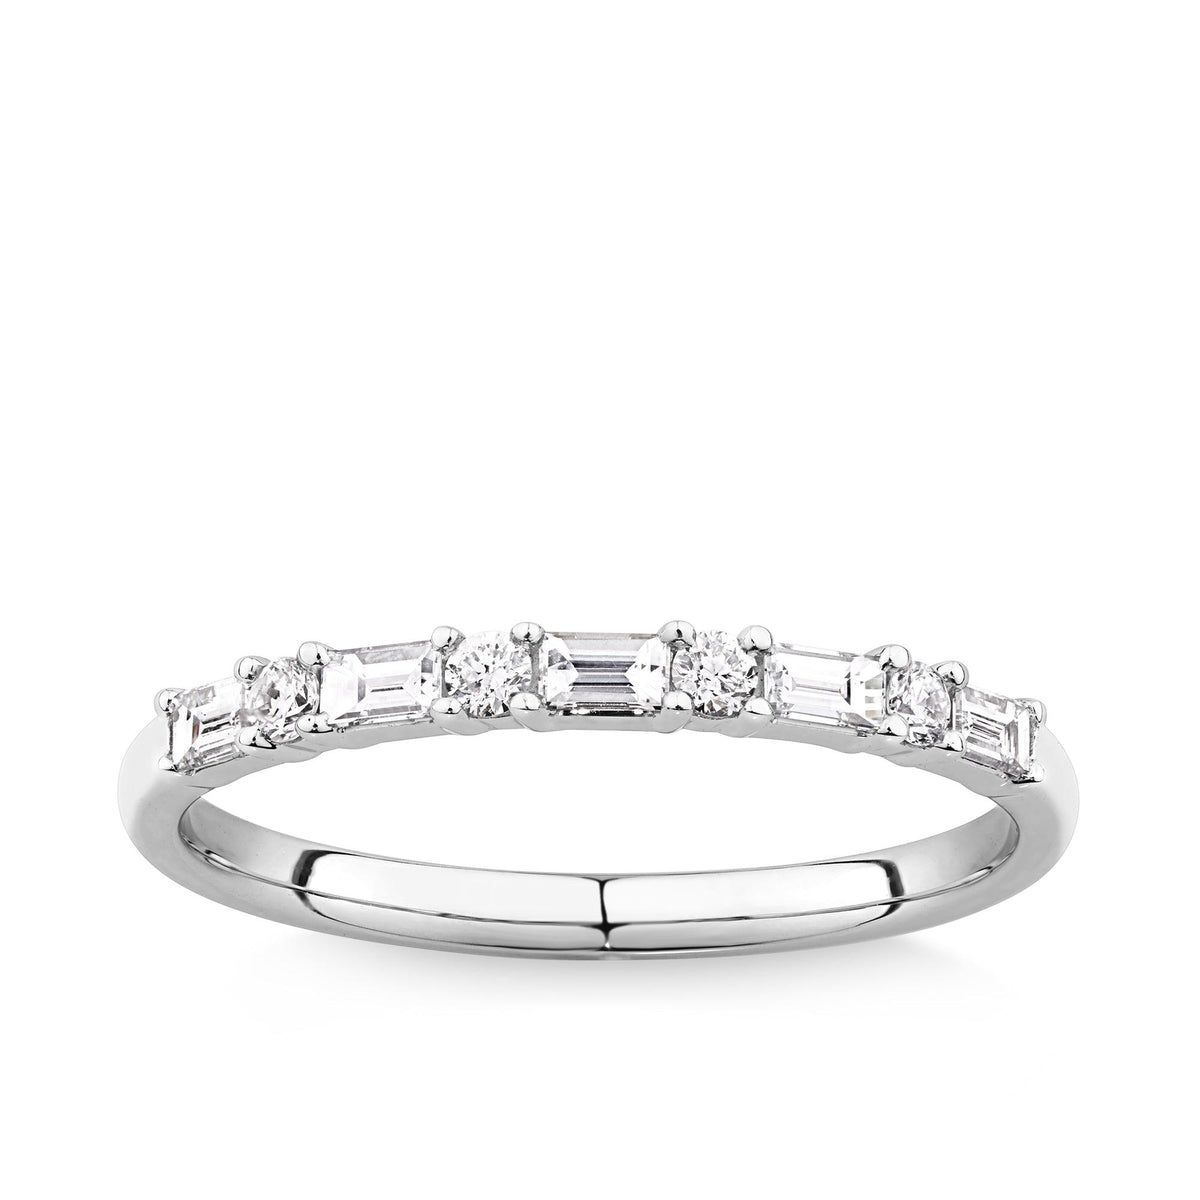 0.34ct TW Diamond Band in 9ct White Gold - Wallace Bishop